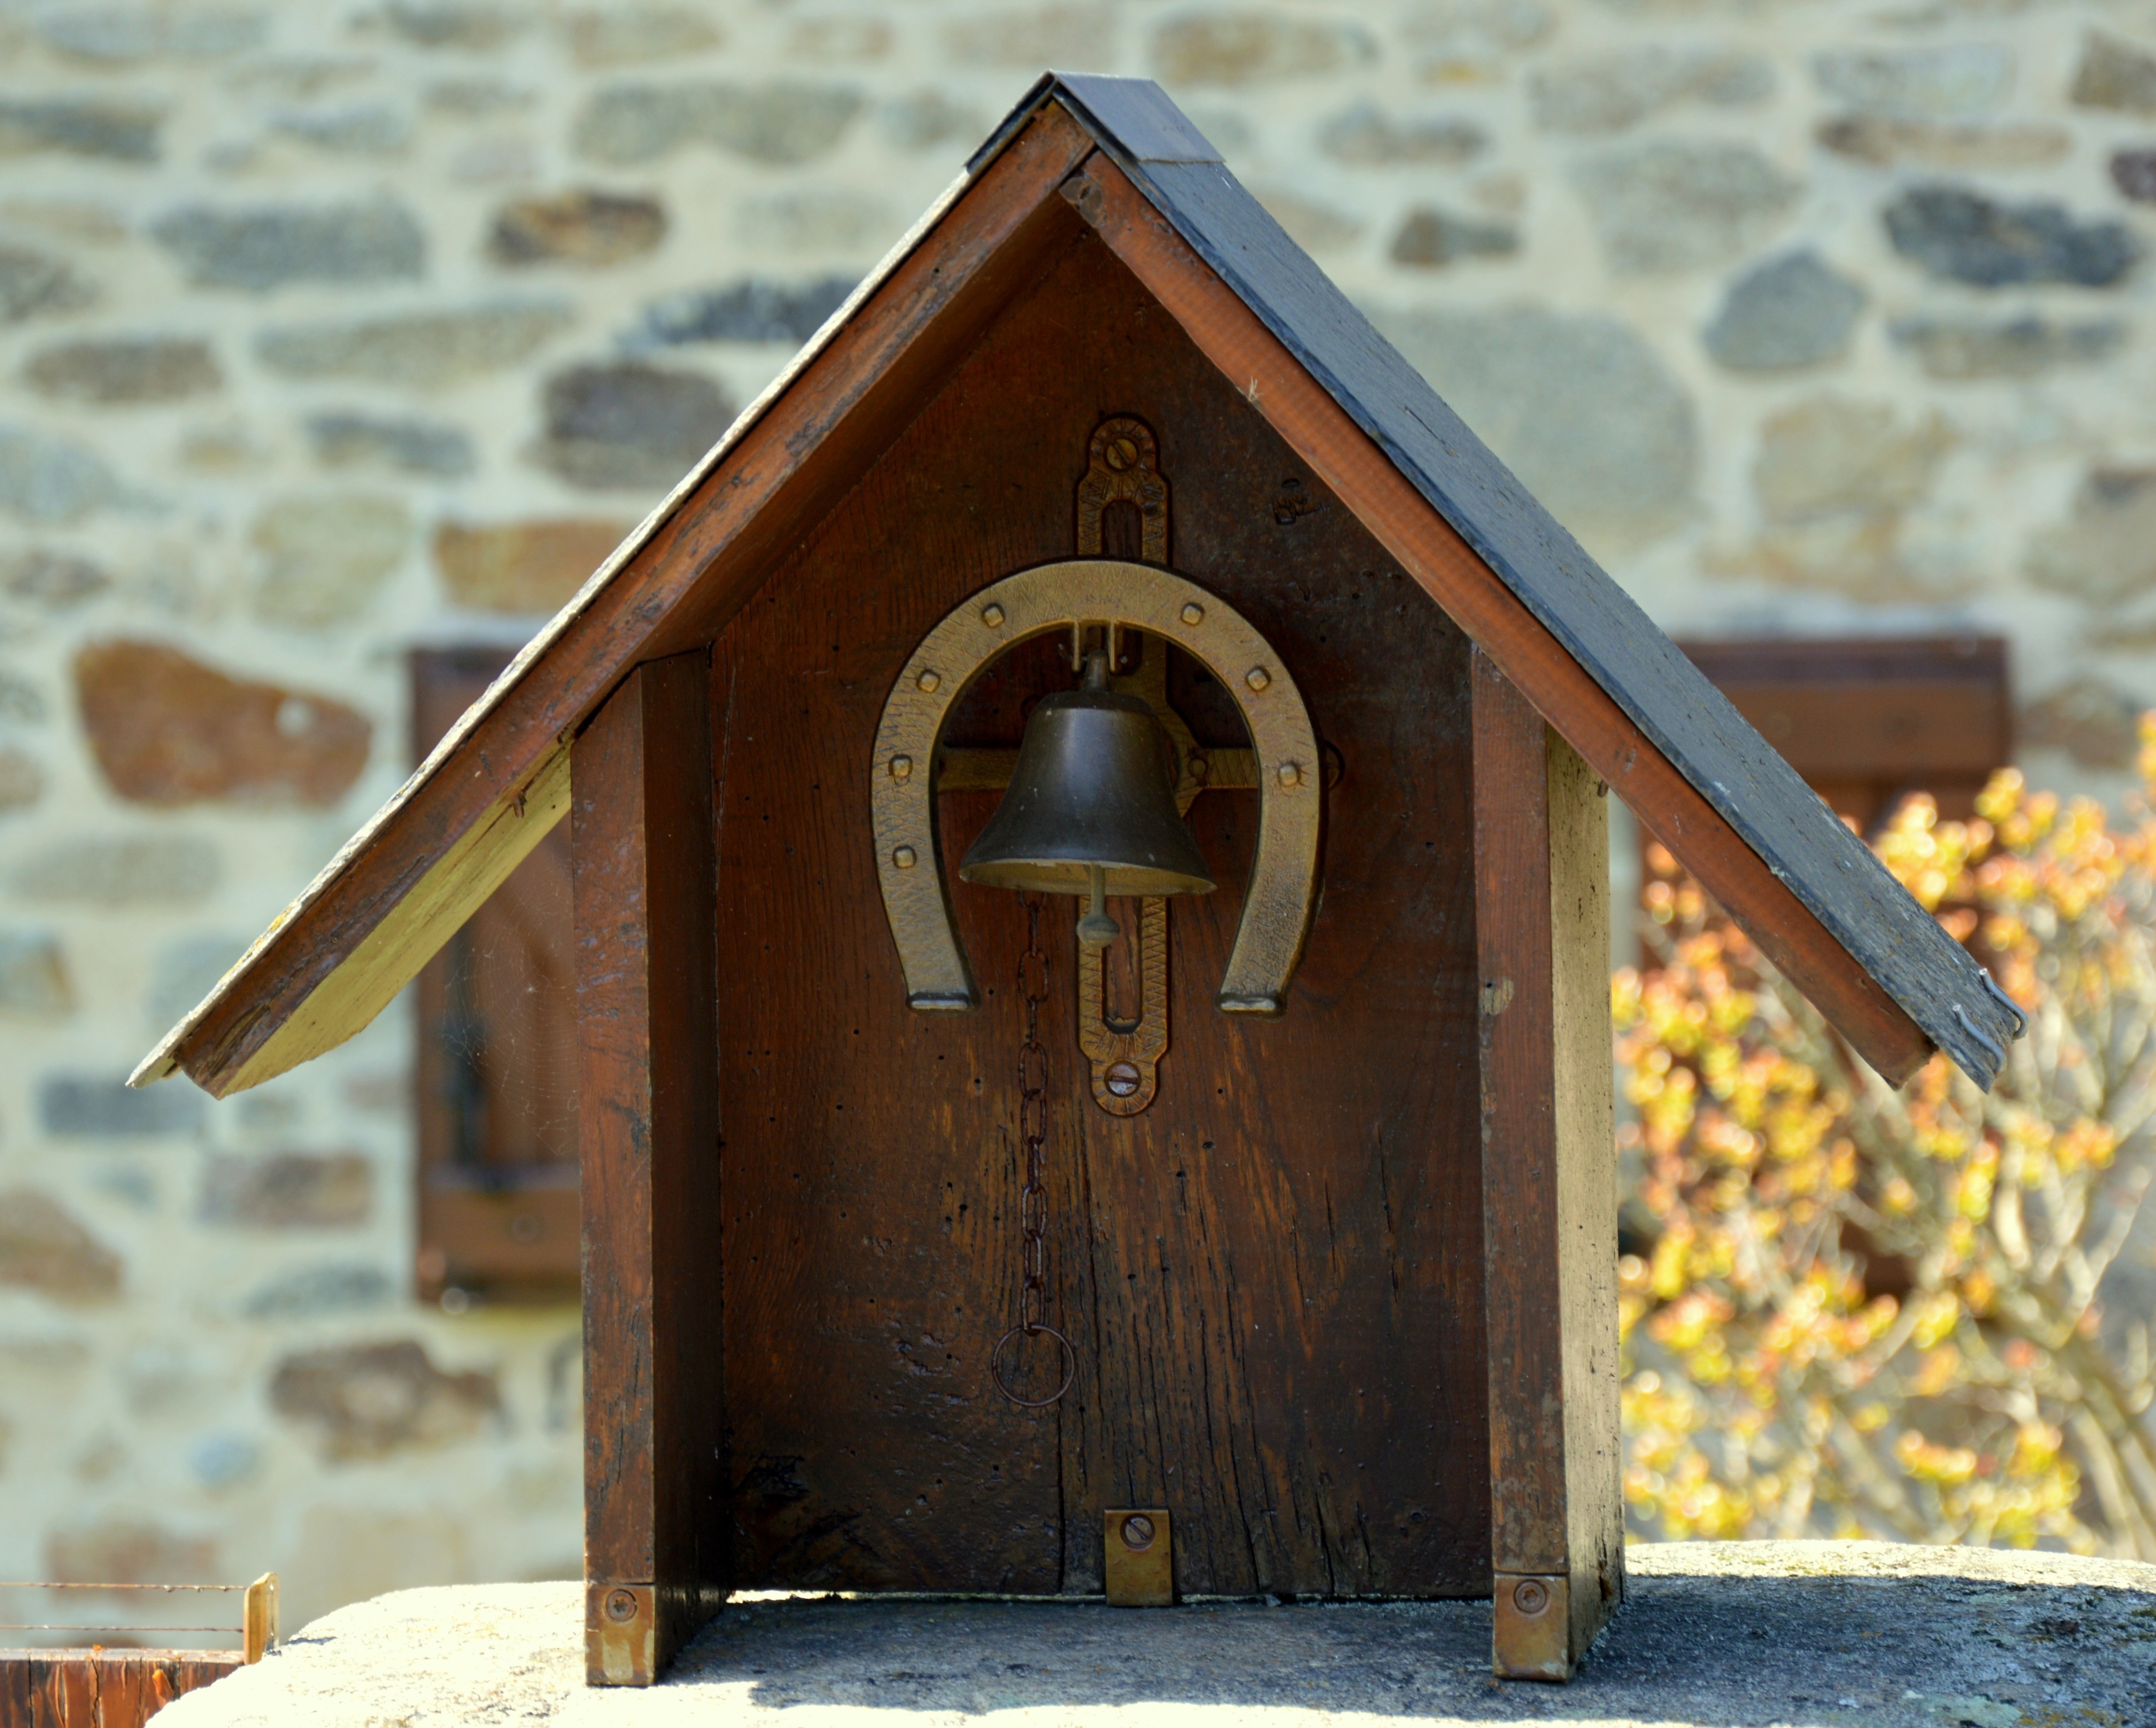 Doorbell, Small House, Horseshoe, Bell, architecture, no people